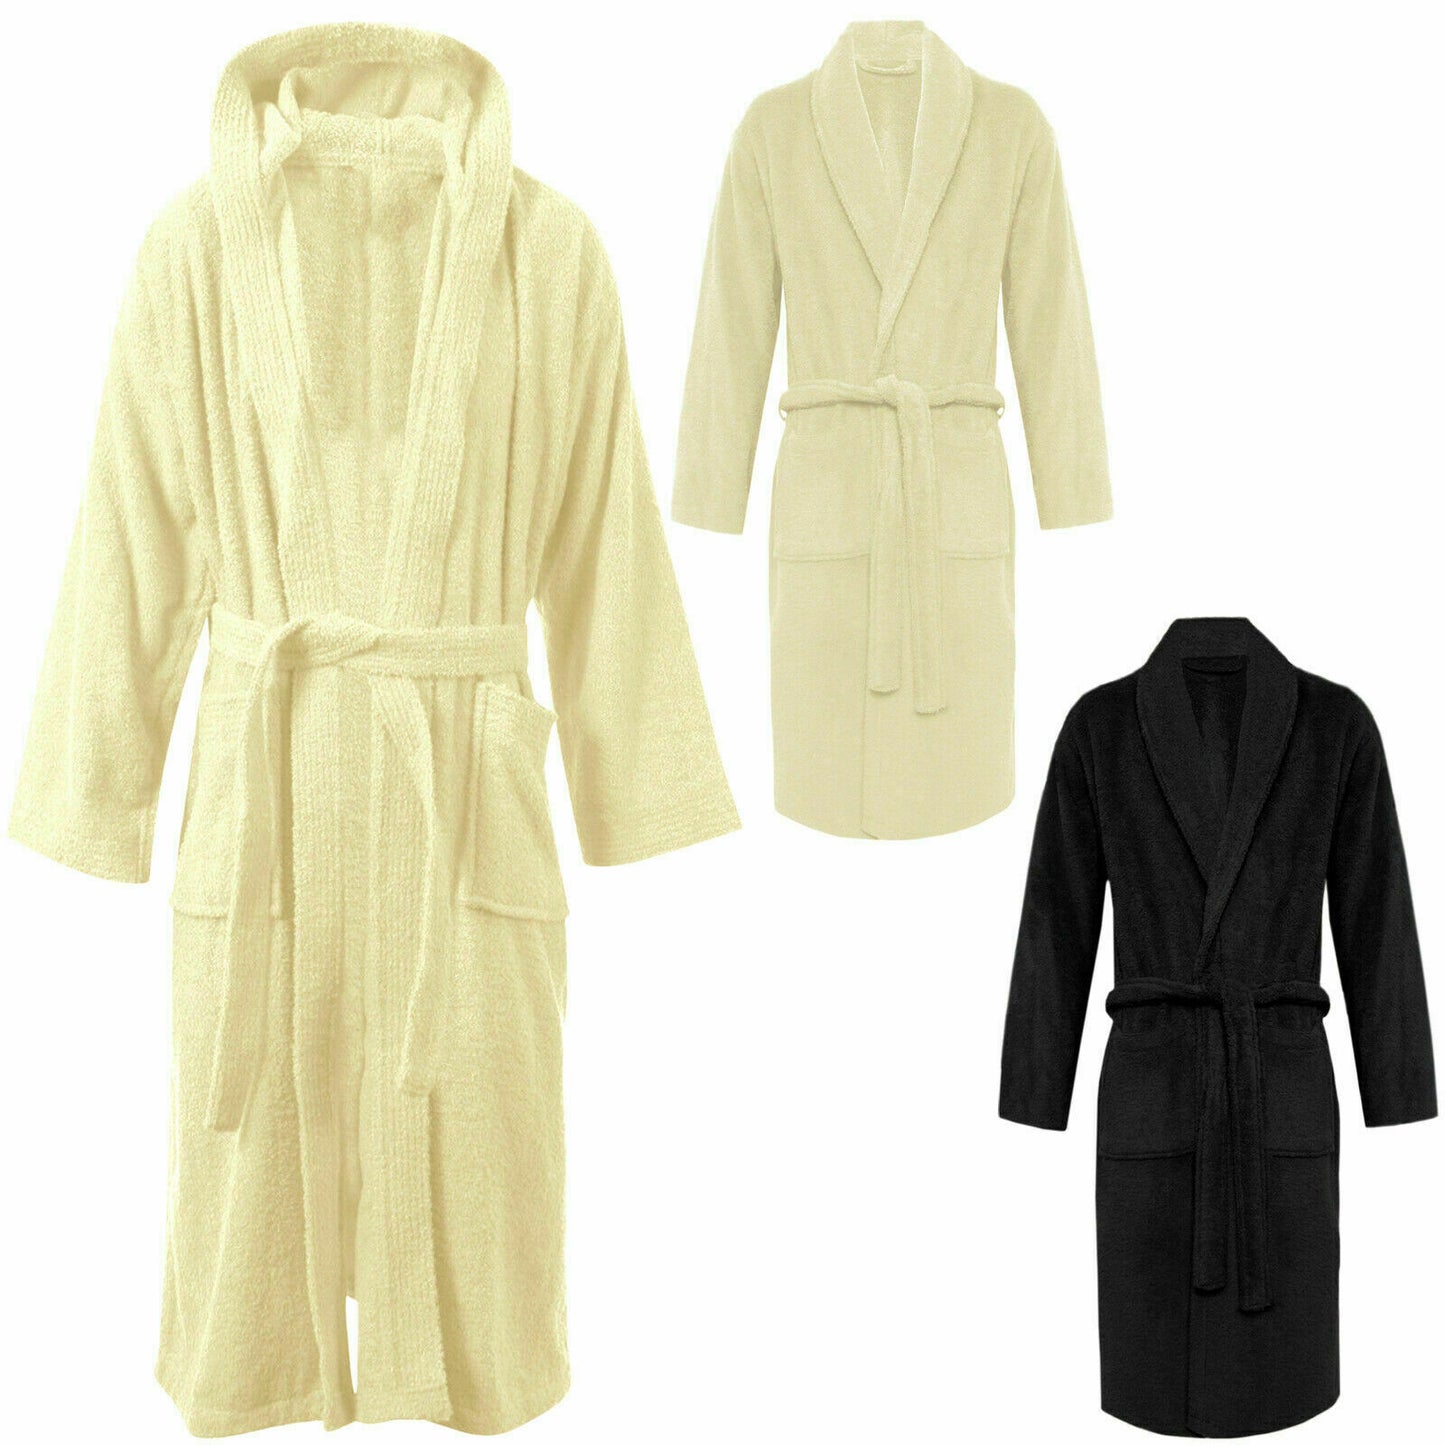 100% LUXURY EGYPTIAN COTTON TOWELLING BATH ROBE UNISEX DRESSING GOWN TERRY TOWEL